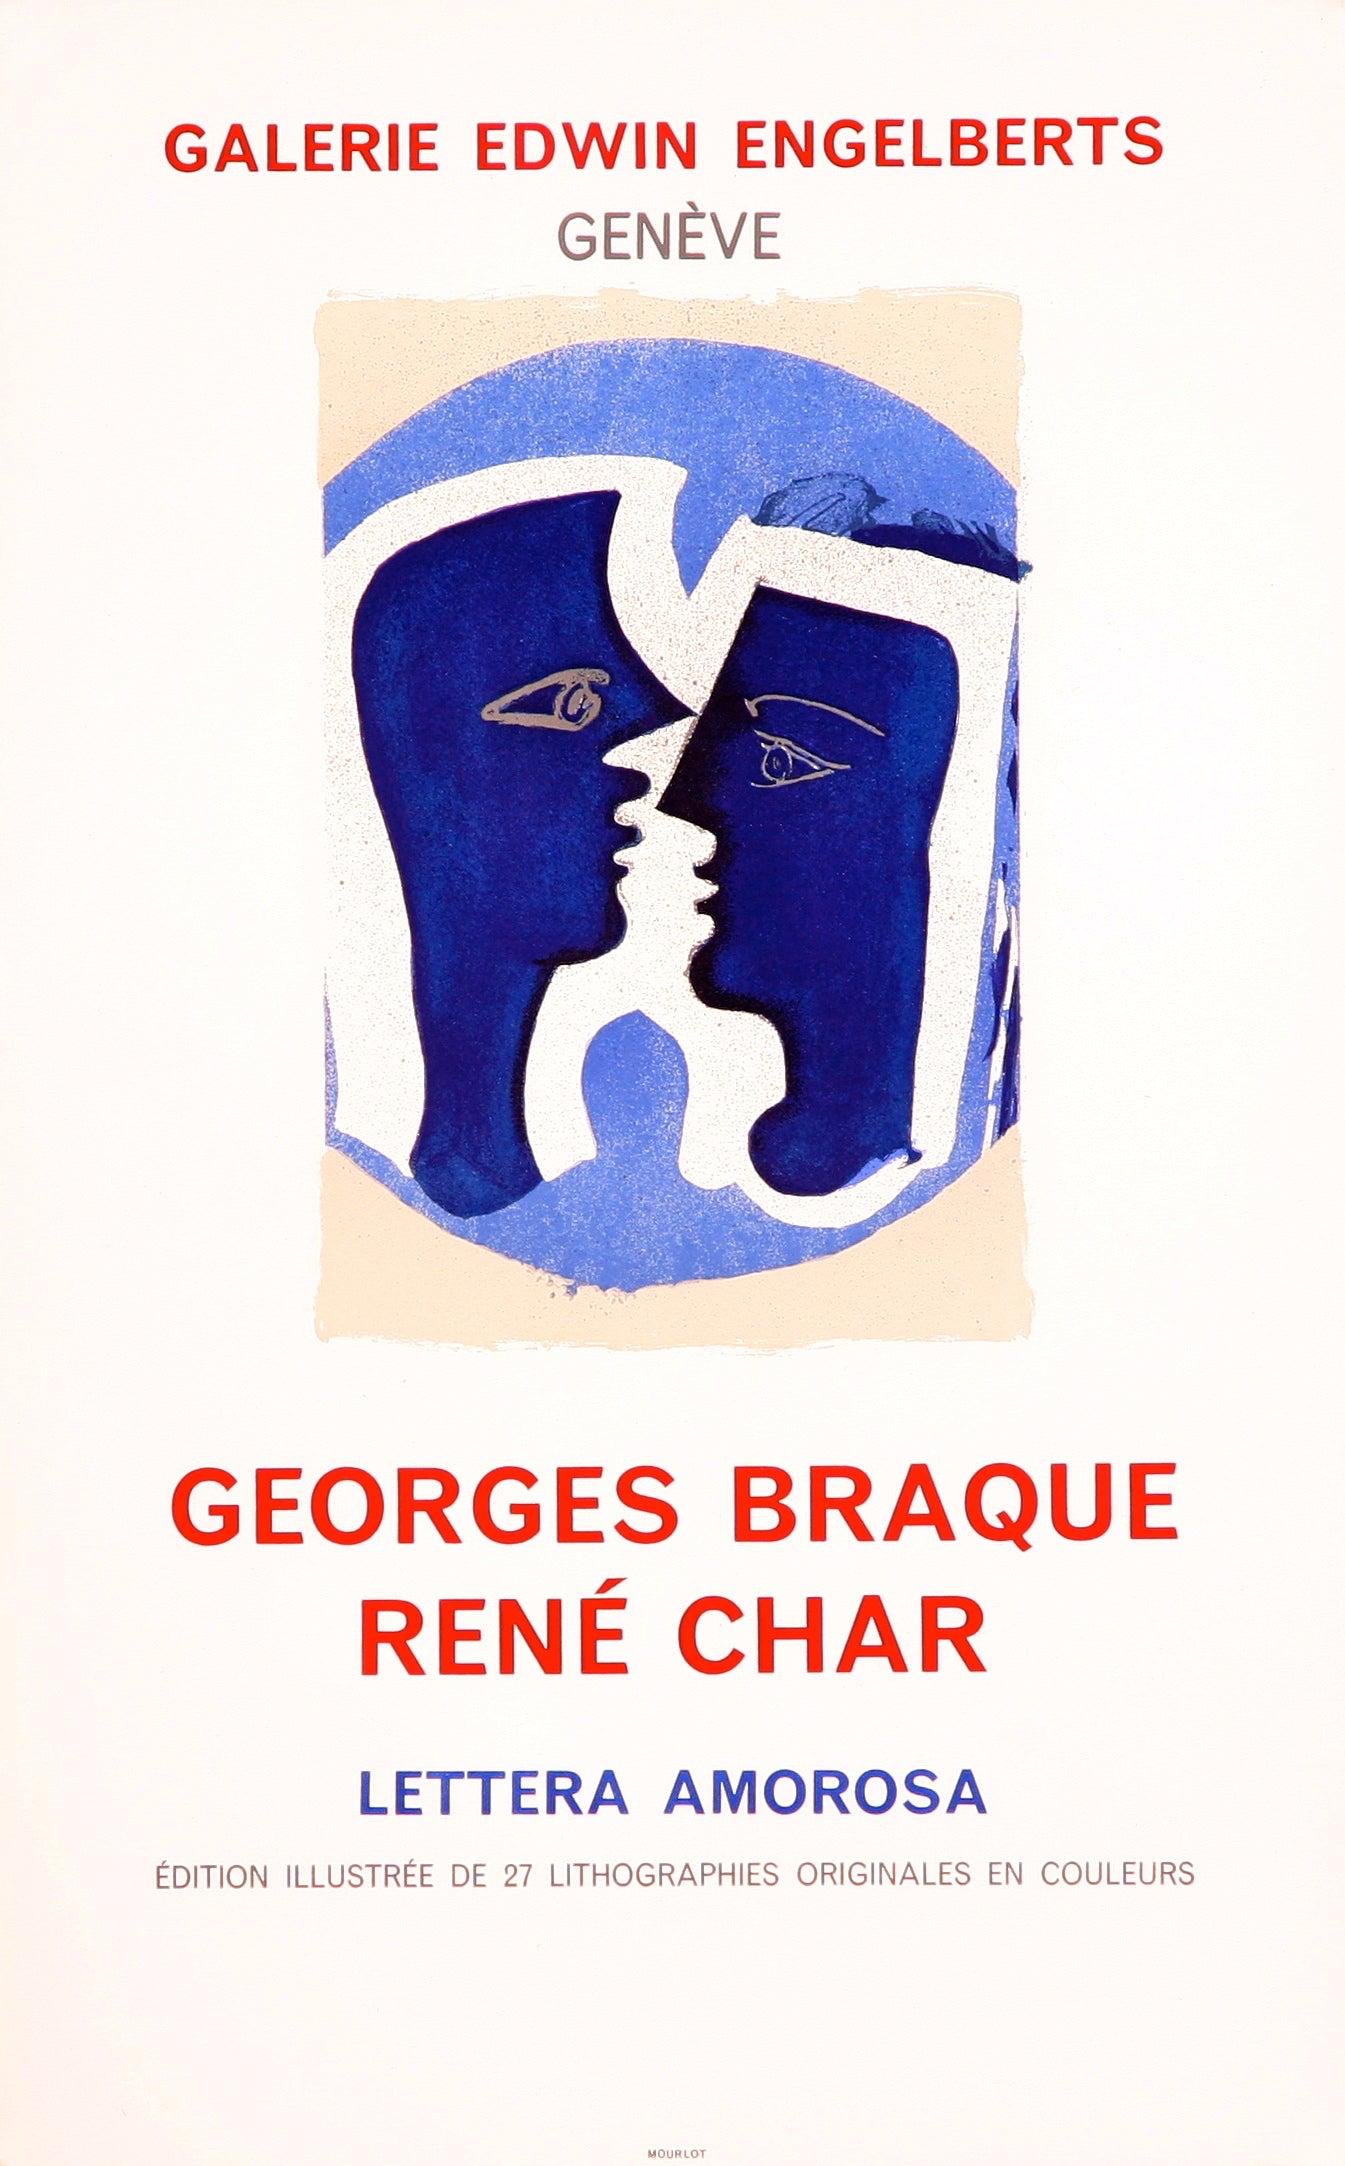 Lettera Amorosa - René Char by Georges Braque, 1963 - Print by George Braque